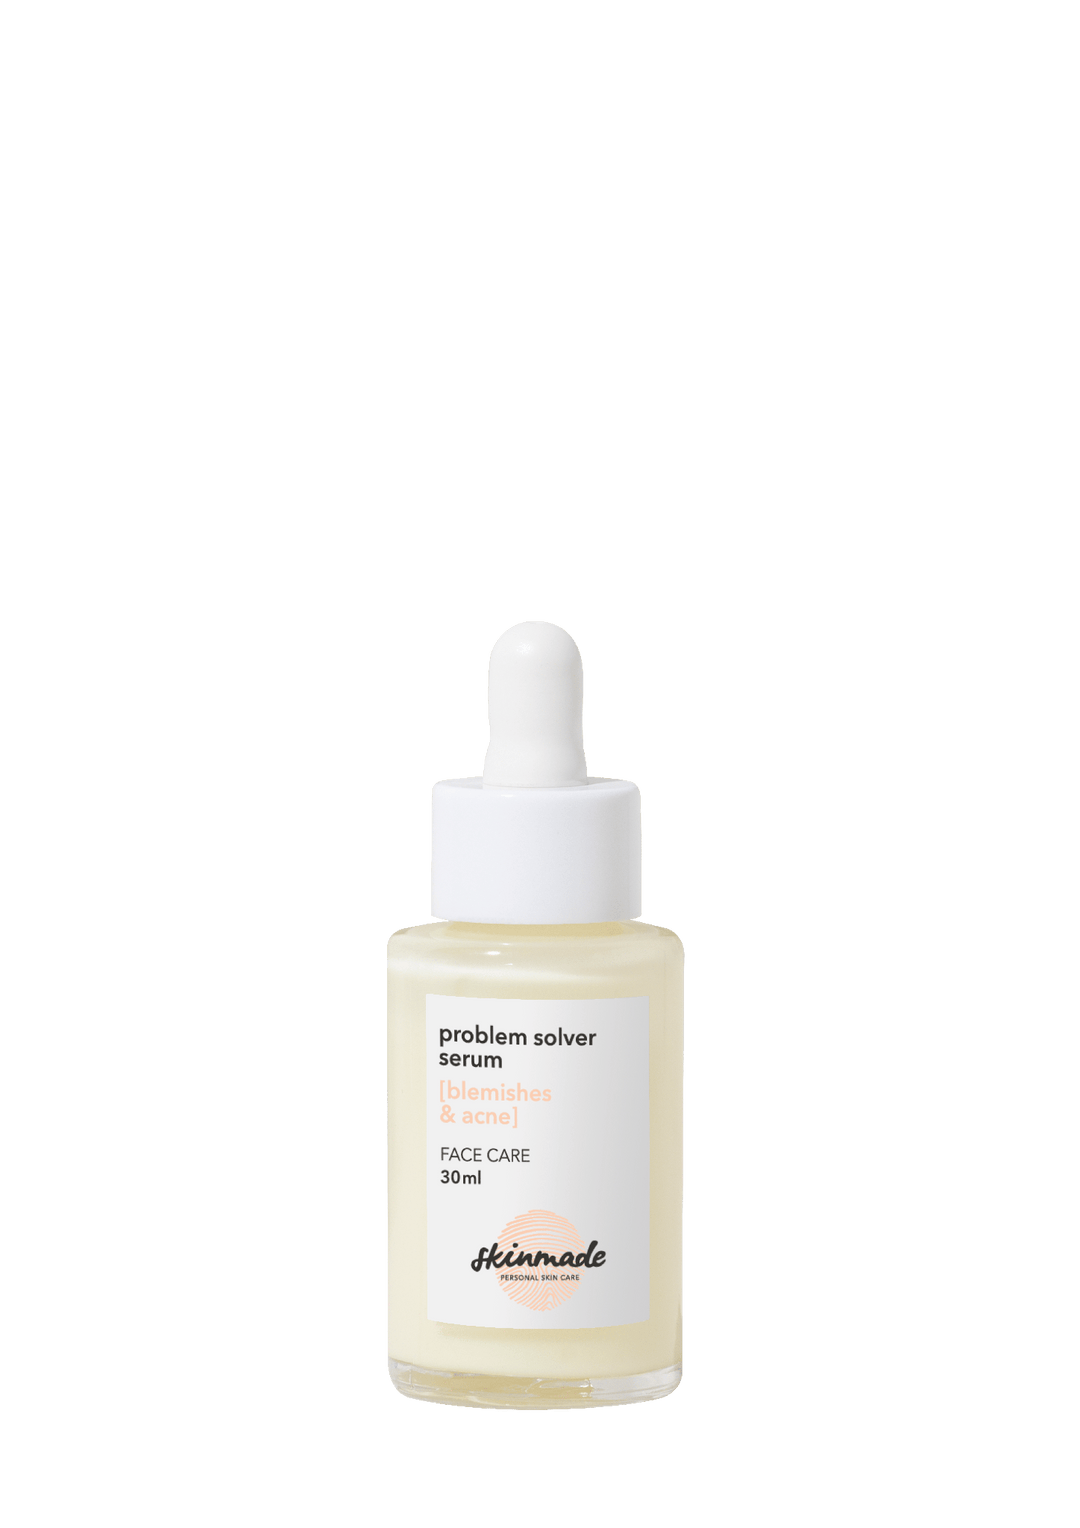 Skinmade Problem Solver Serum - Blemishes and Acne